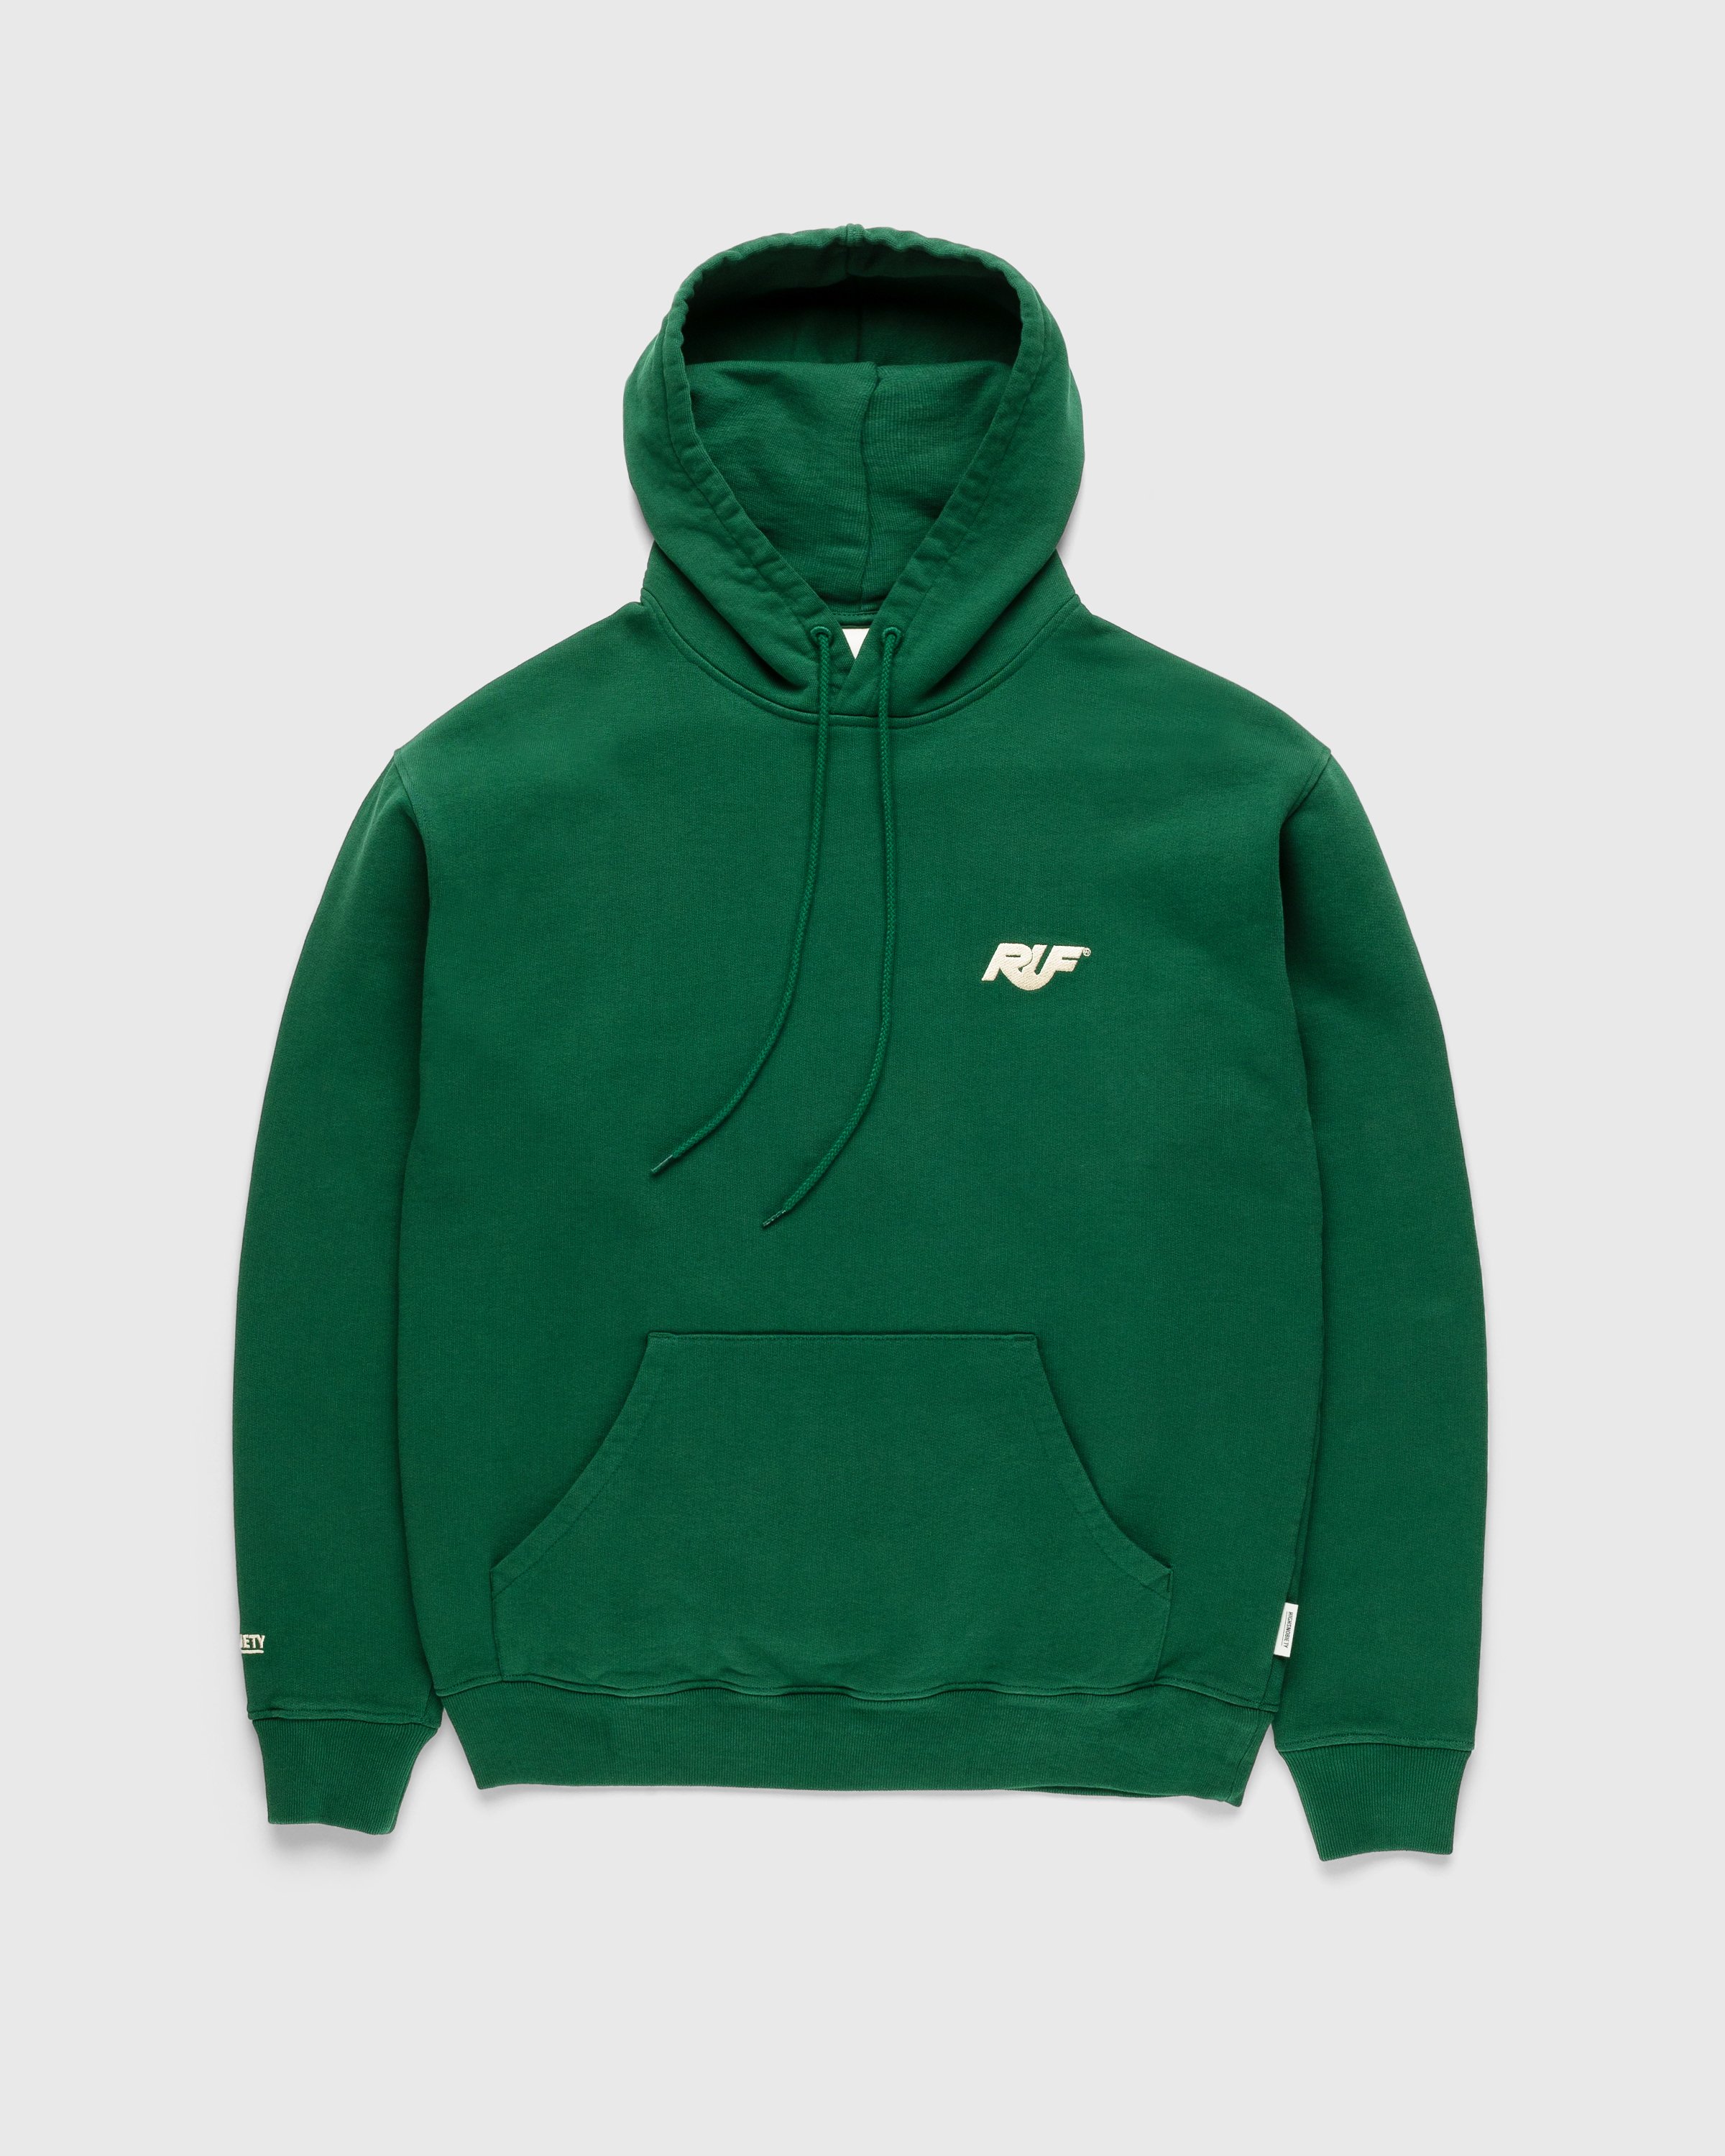 RUF x Highsnobiety - Logo Embroidered Hoodie Green - Clothing - Green - Image 2